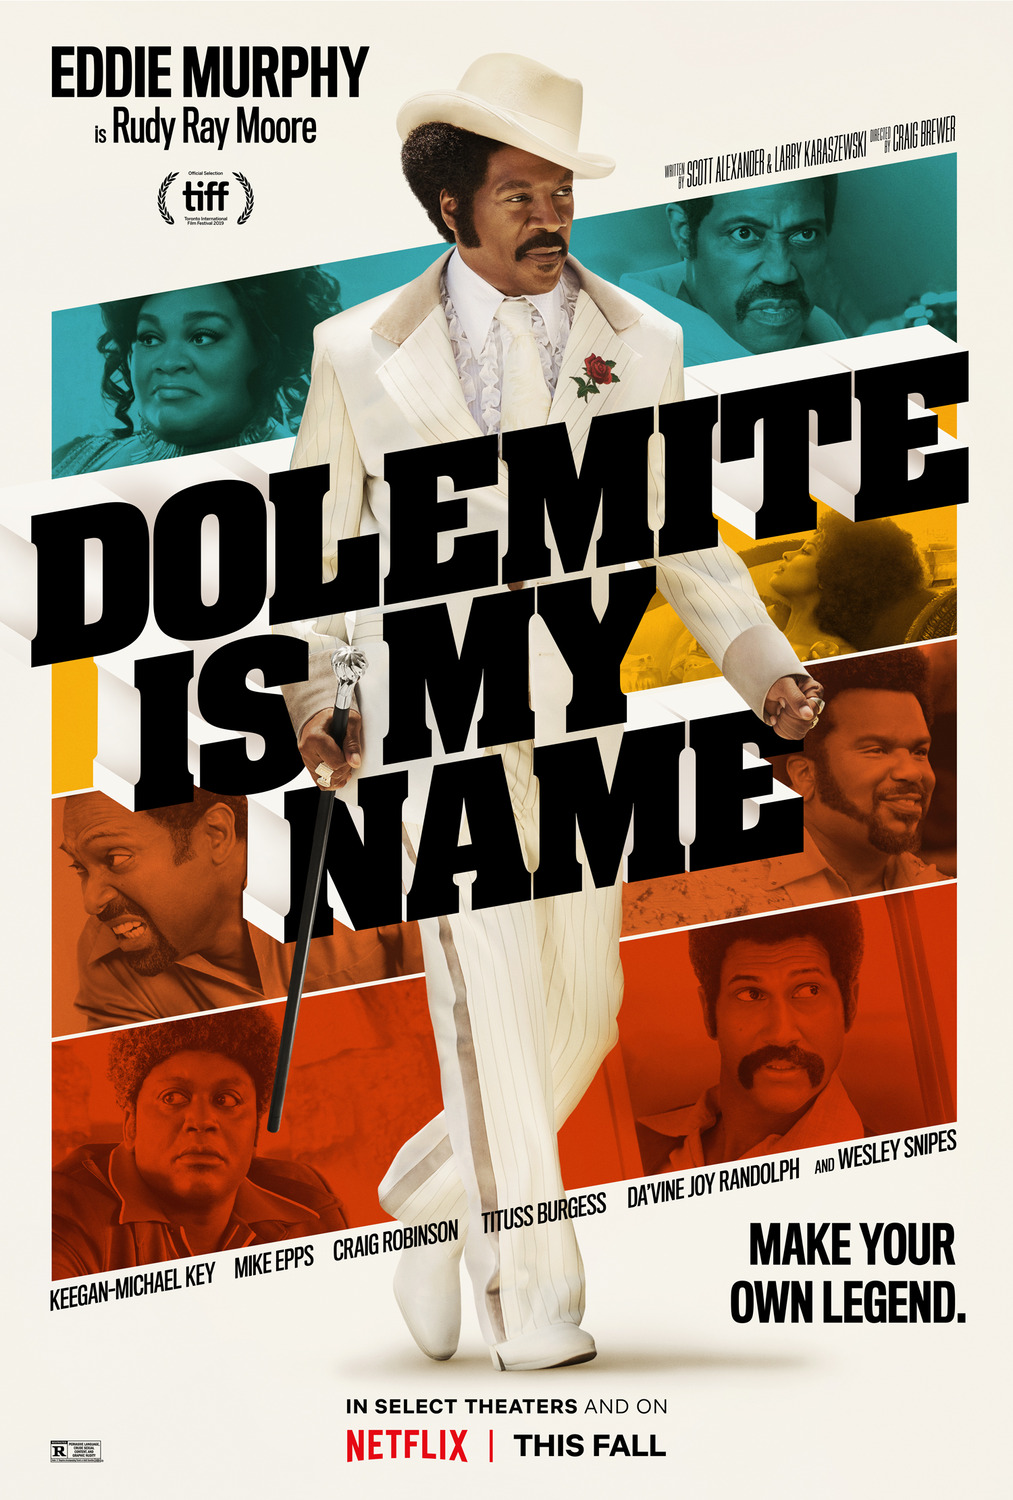 Dolemite Is My Name – Eddie Murphy is Back… In a Hilarious True Story!